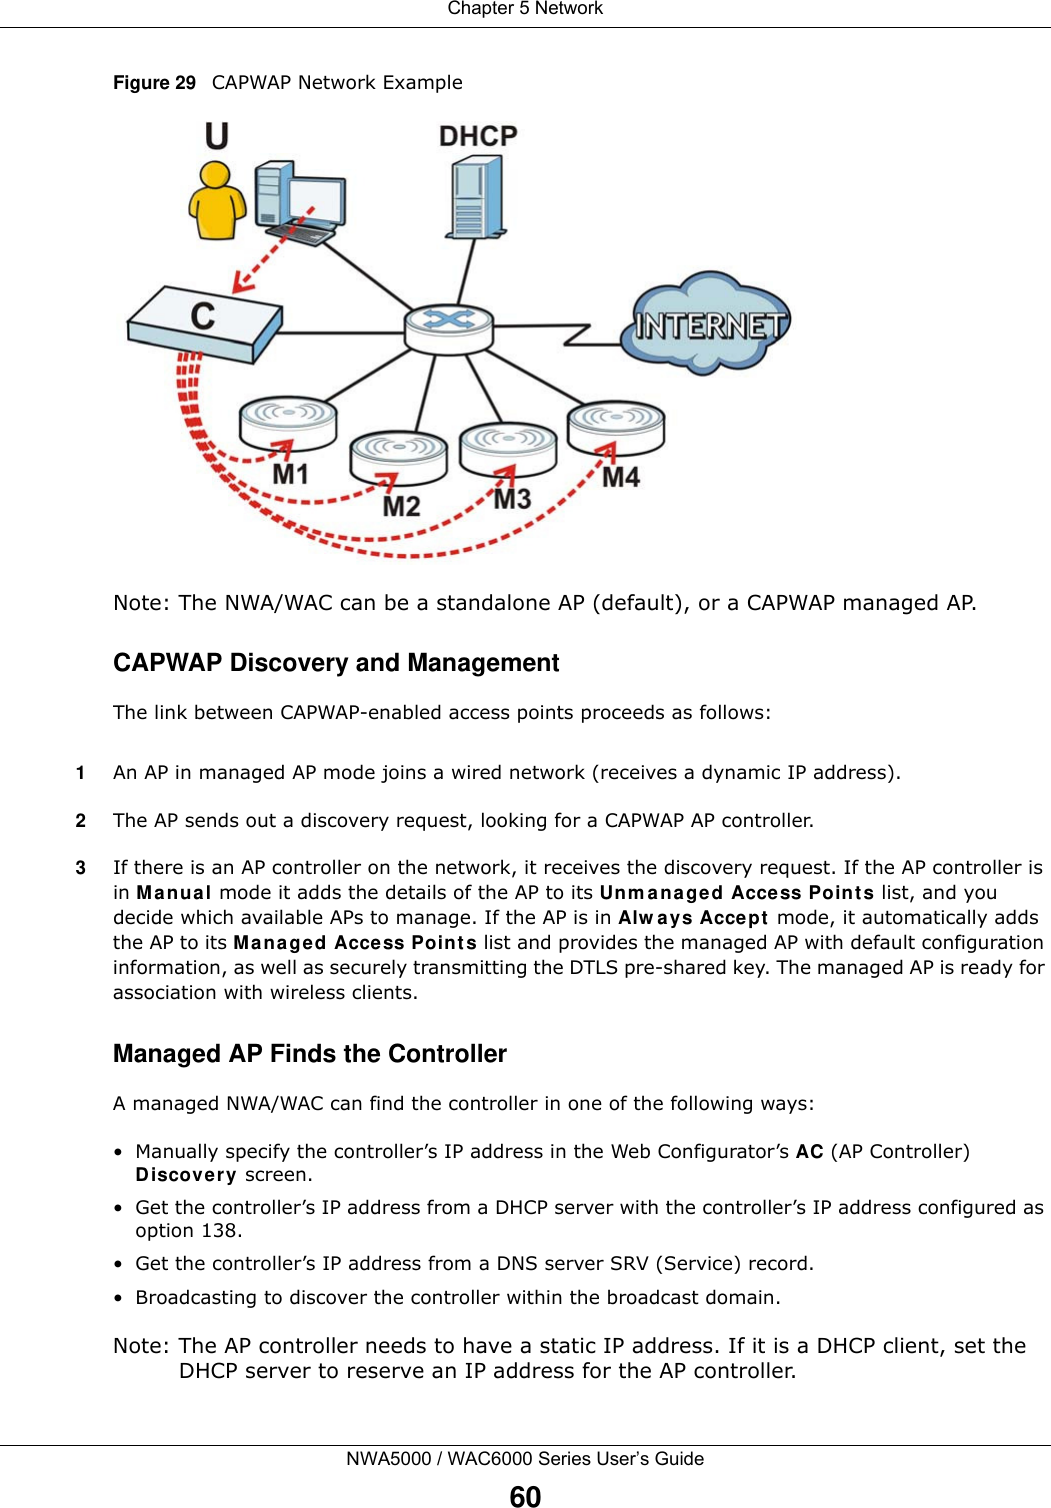 Chapter 5 NetworkNWA5000 / WAC6000 Series User’s Guide60Figure 29   CAPWAP Network ExampleNote: The NWA/WAC can be a standalone AP (default), or a CAPWAP managed AP.CAPWAP Discovery and ManagementThe link between CAPWAP-enabled access points proceeds as follows:1An AP in managed AP mode joins a wired network (receives a dynamic IP address).2The AP sends out a discovery request, looking for a CAPWAP AP controller.3If there is an AP controller on the network, it receives the discovery request. If the AP controller is in Manual mode it adds the details of the AP to its Unmanaged Access Points list, and you decide which available APs to manage. If the AP is in Always Accept mode, it automatically adds the AP to its Managed Access Points list and provides the managed AP with default configuration information, as well as securely transmitting the DTLS pre-shared key. The managed AP is ready for association with wireless clients.Managed AP Finds the ControllerA managed NWA/WAC can find the controller in one of the following ways:• Manually specify the controller’s IP address in the Web Configurator’s AC (AP Controller) Discovery screen. • Get the controller’s IP address from a DHCP server with the controller’s IP address configured as option 138.• Get the controller’s IP address from a DNS server SRV (Service) record.• Broadcasting to discover the controller within the broadcast domain.Note: The AP controller needs to have a static IP address. If it is a DHCP client, set the DHCP server to reserve an IP address for the AP controller.